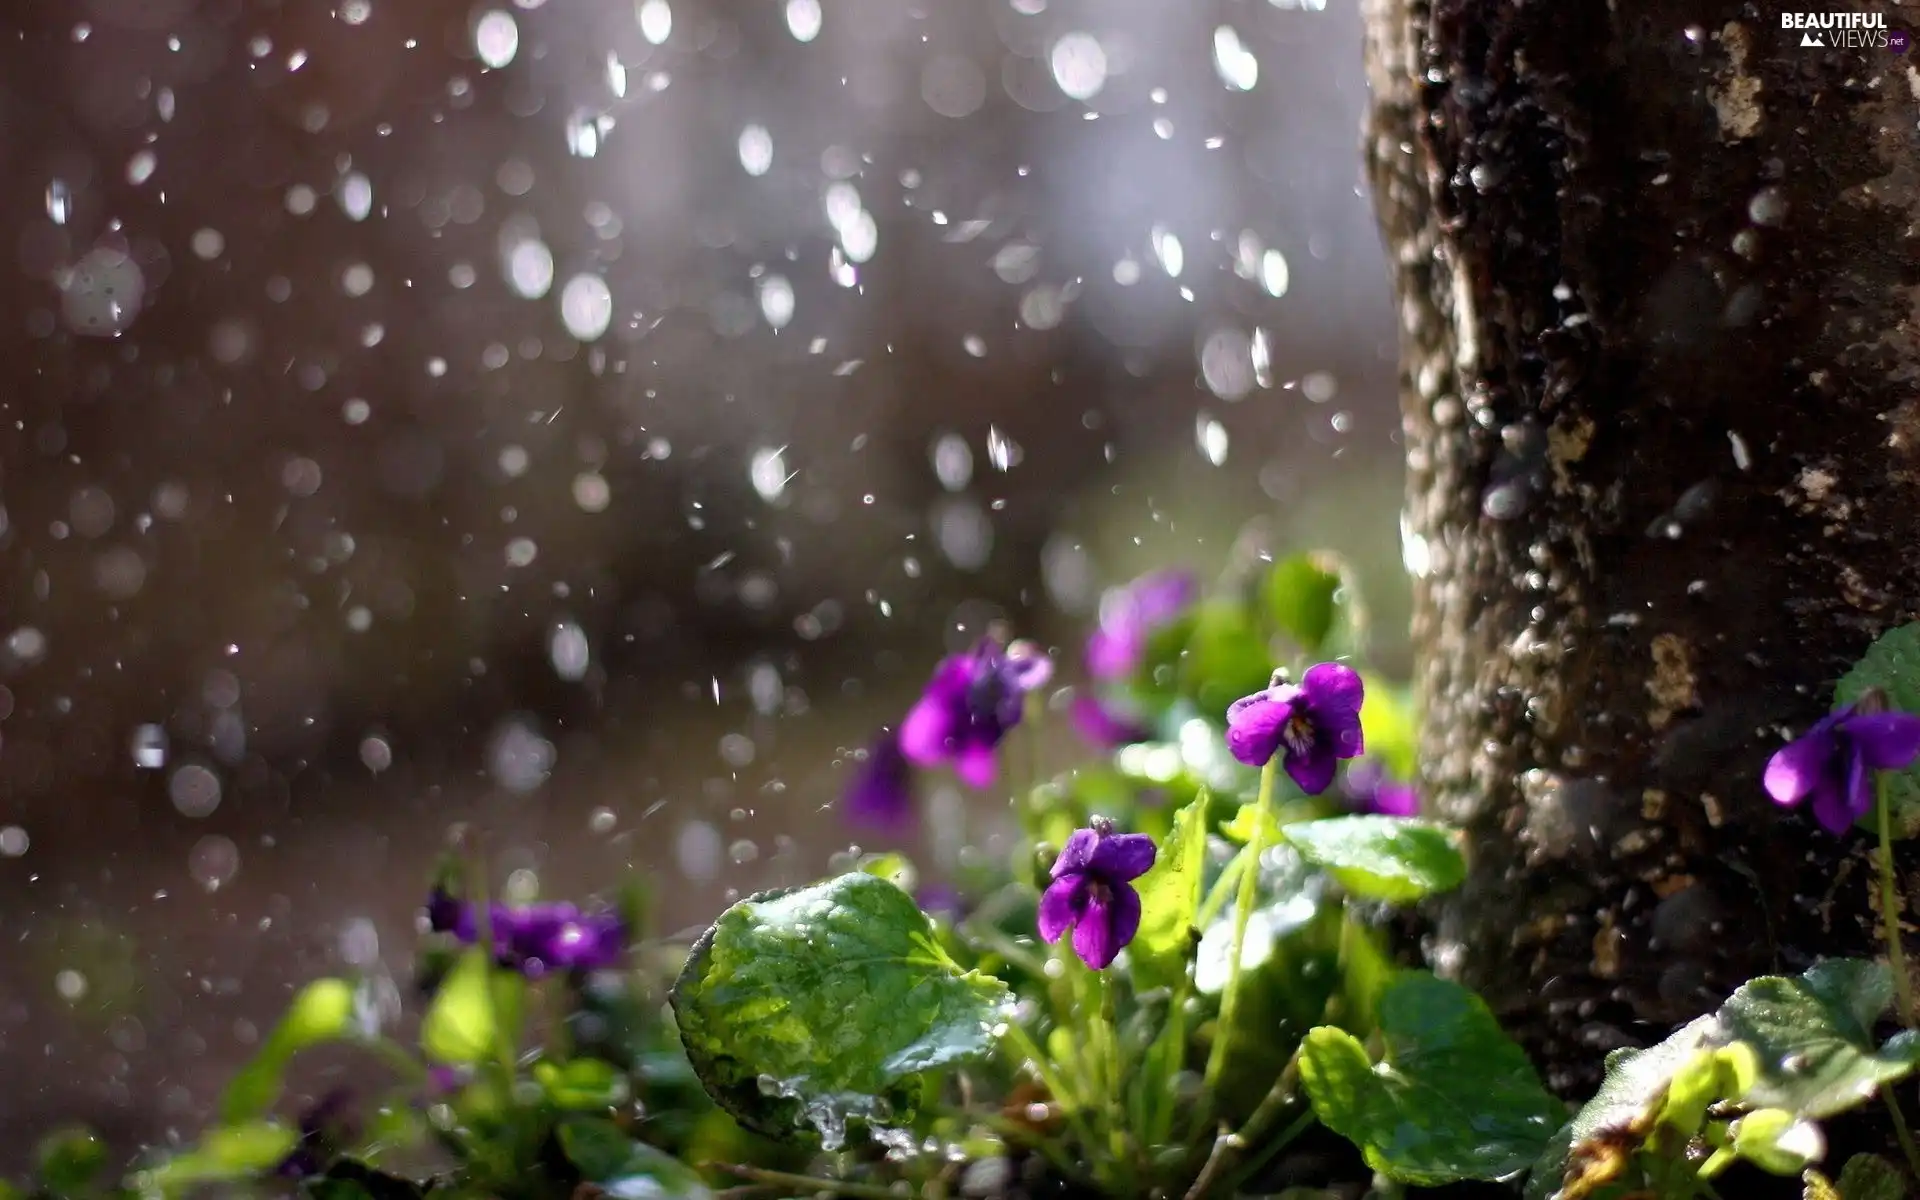 viewes, Rain, trunk, trees, Violets